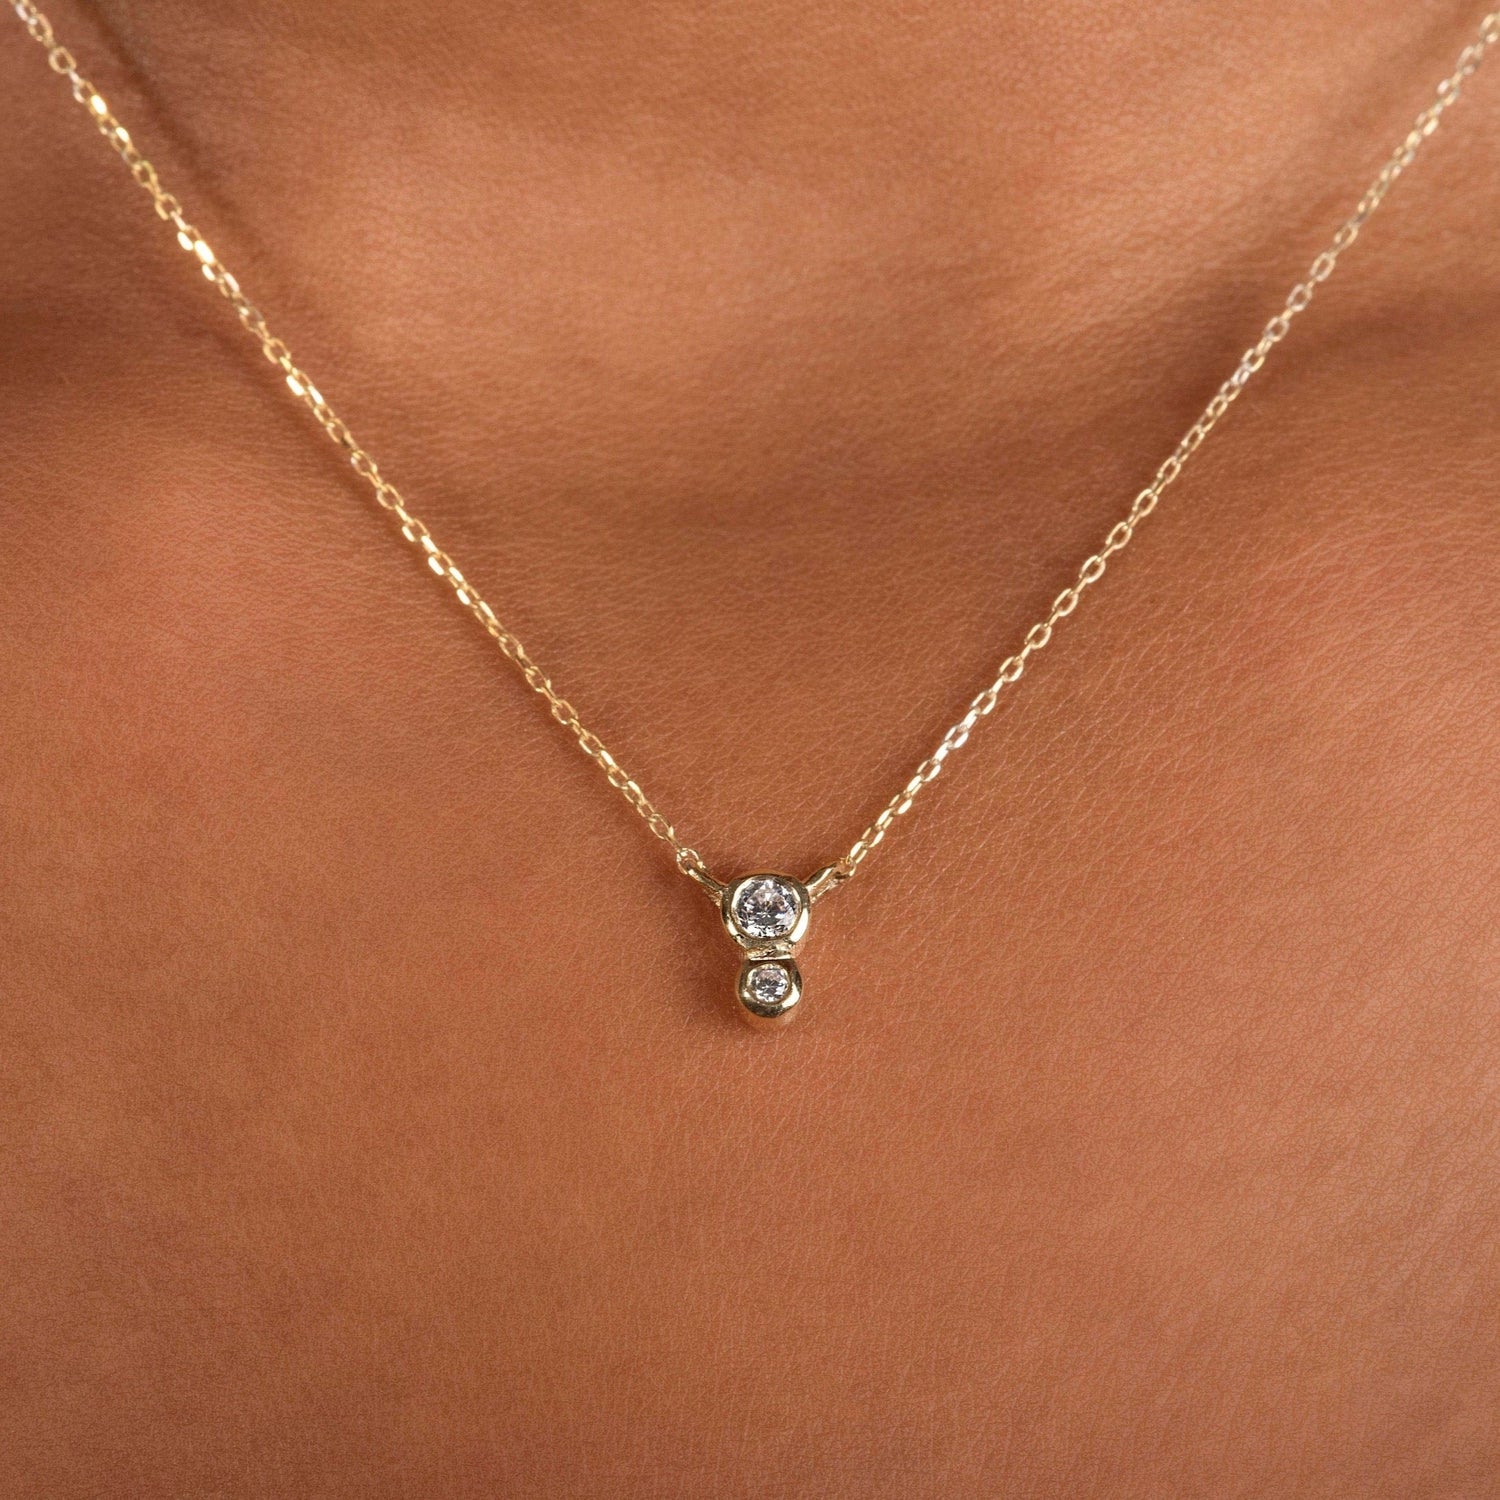 14k Gold Bezel Diamond Necklace, Solitaire Necklace with two Diamonds, Dainty Diamond Necklace, Unique Design wear it all-day every day